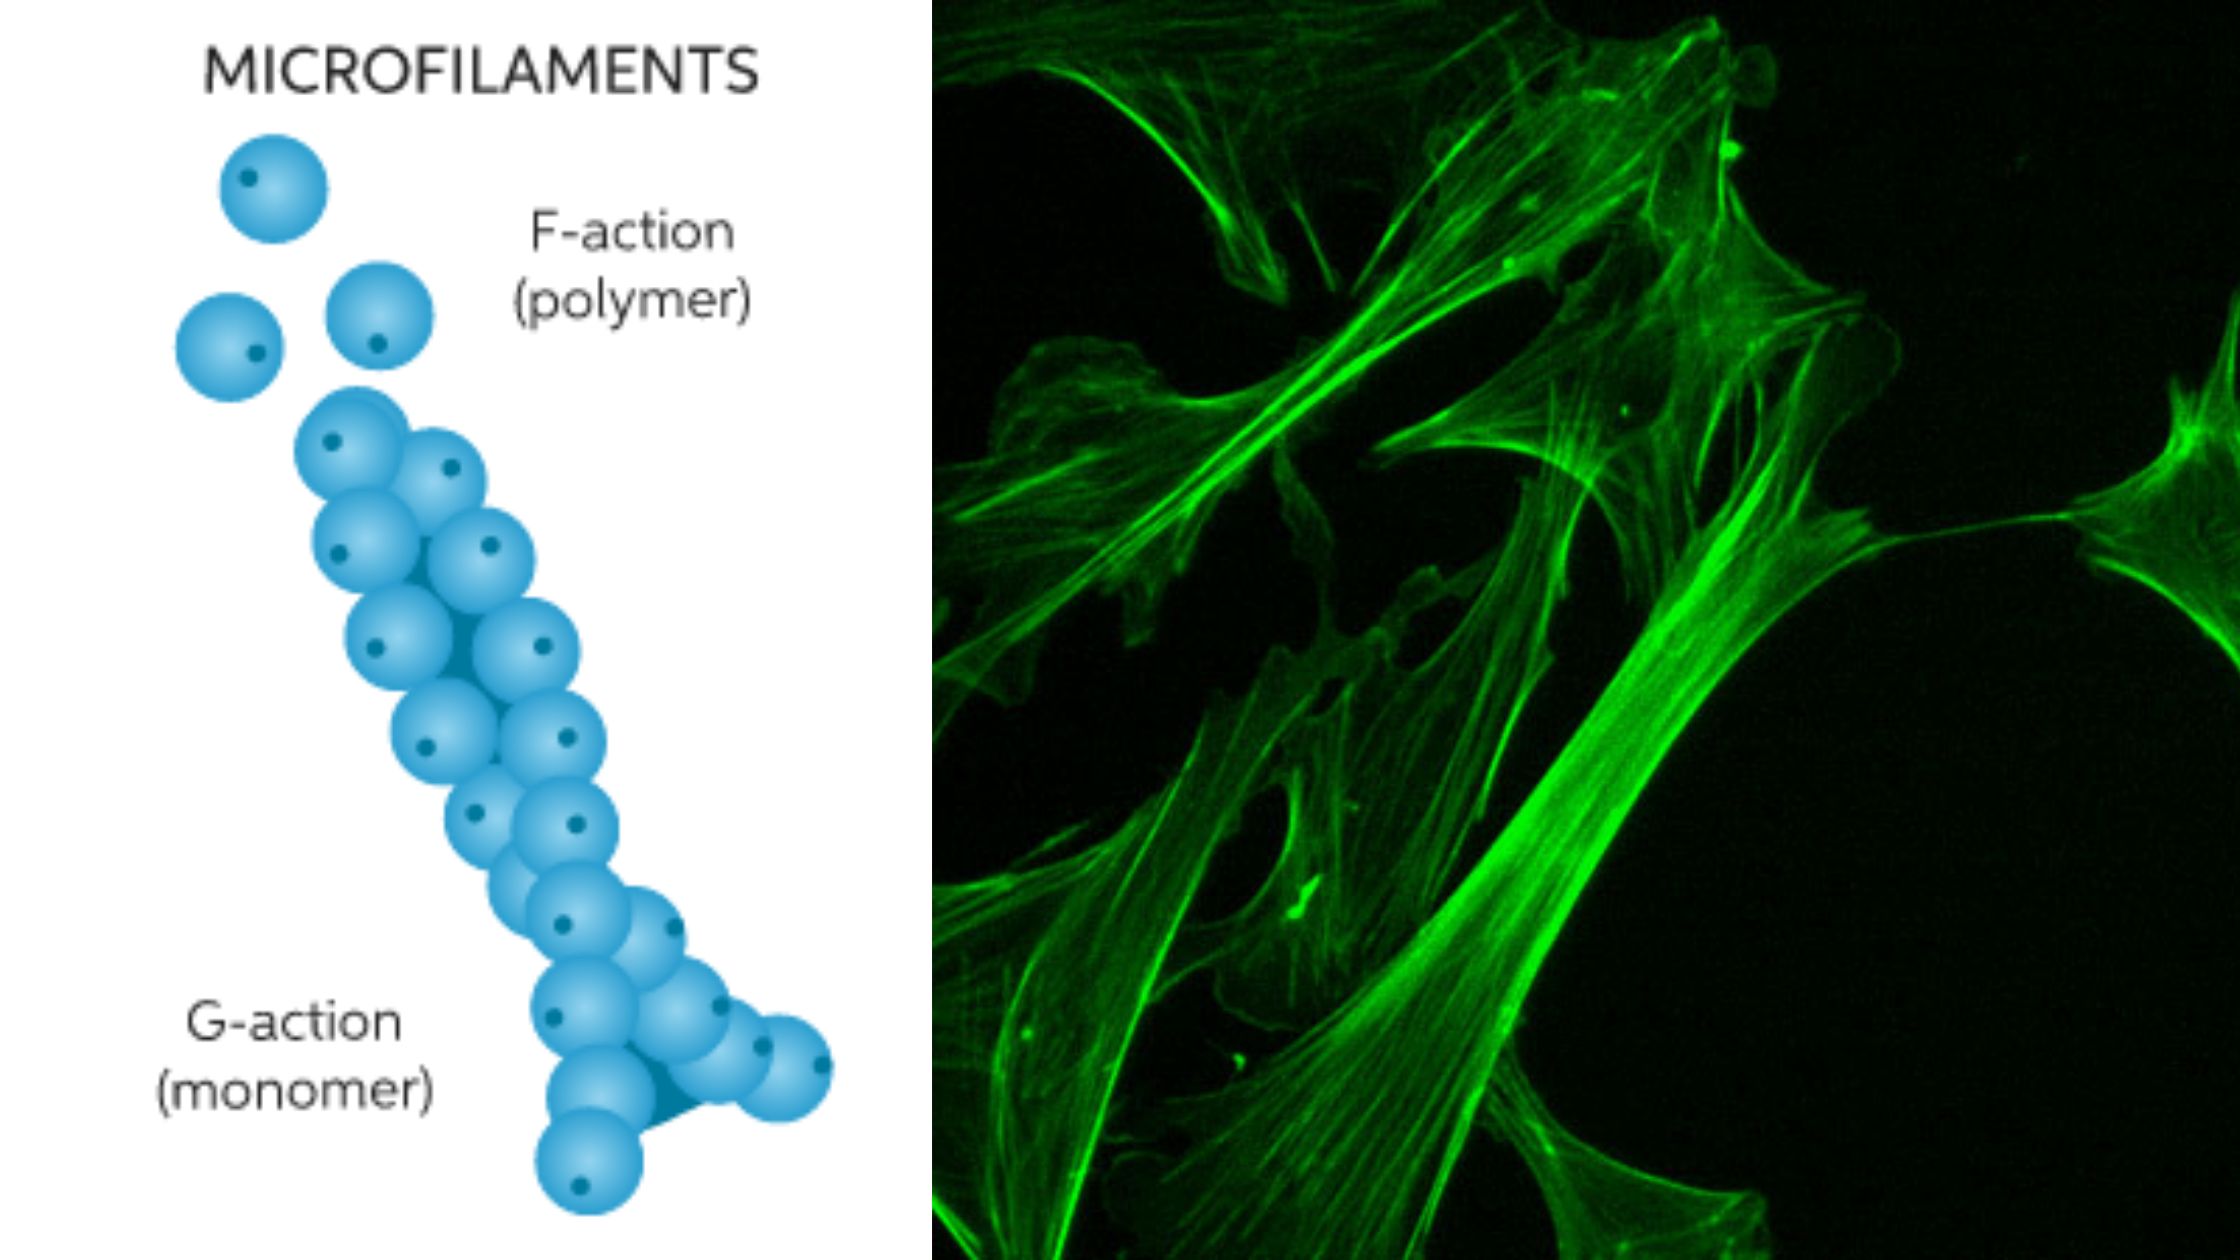 Microfilaments - Definition, Structure, Function